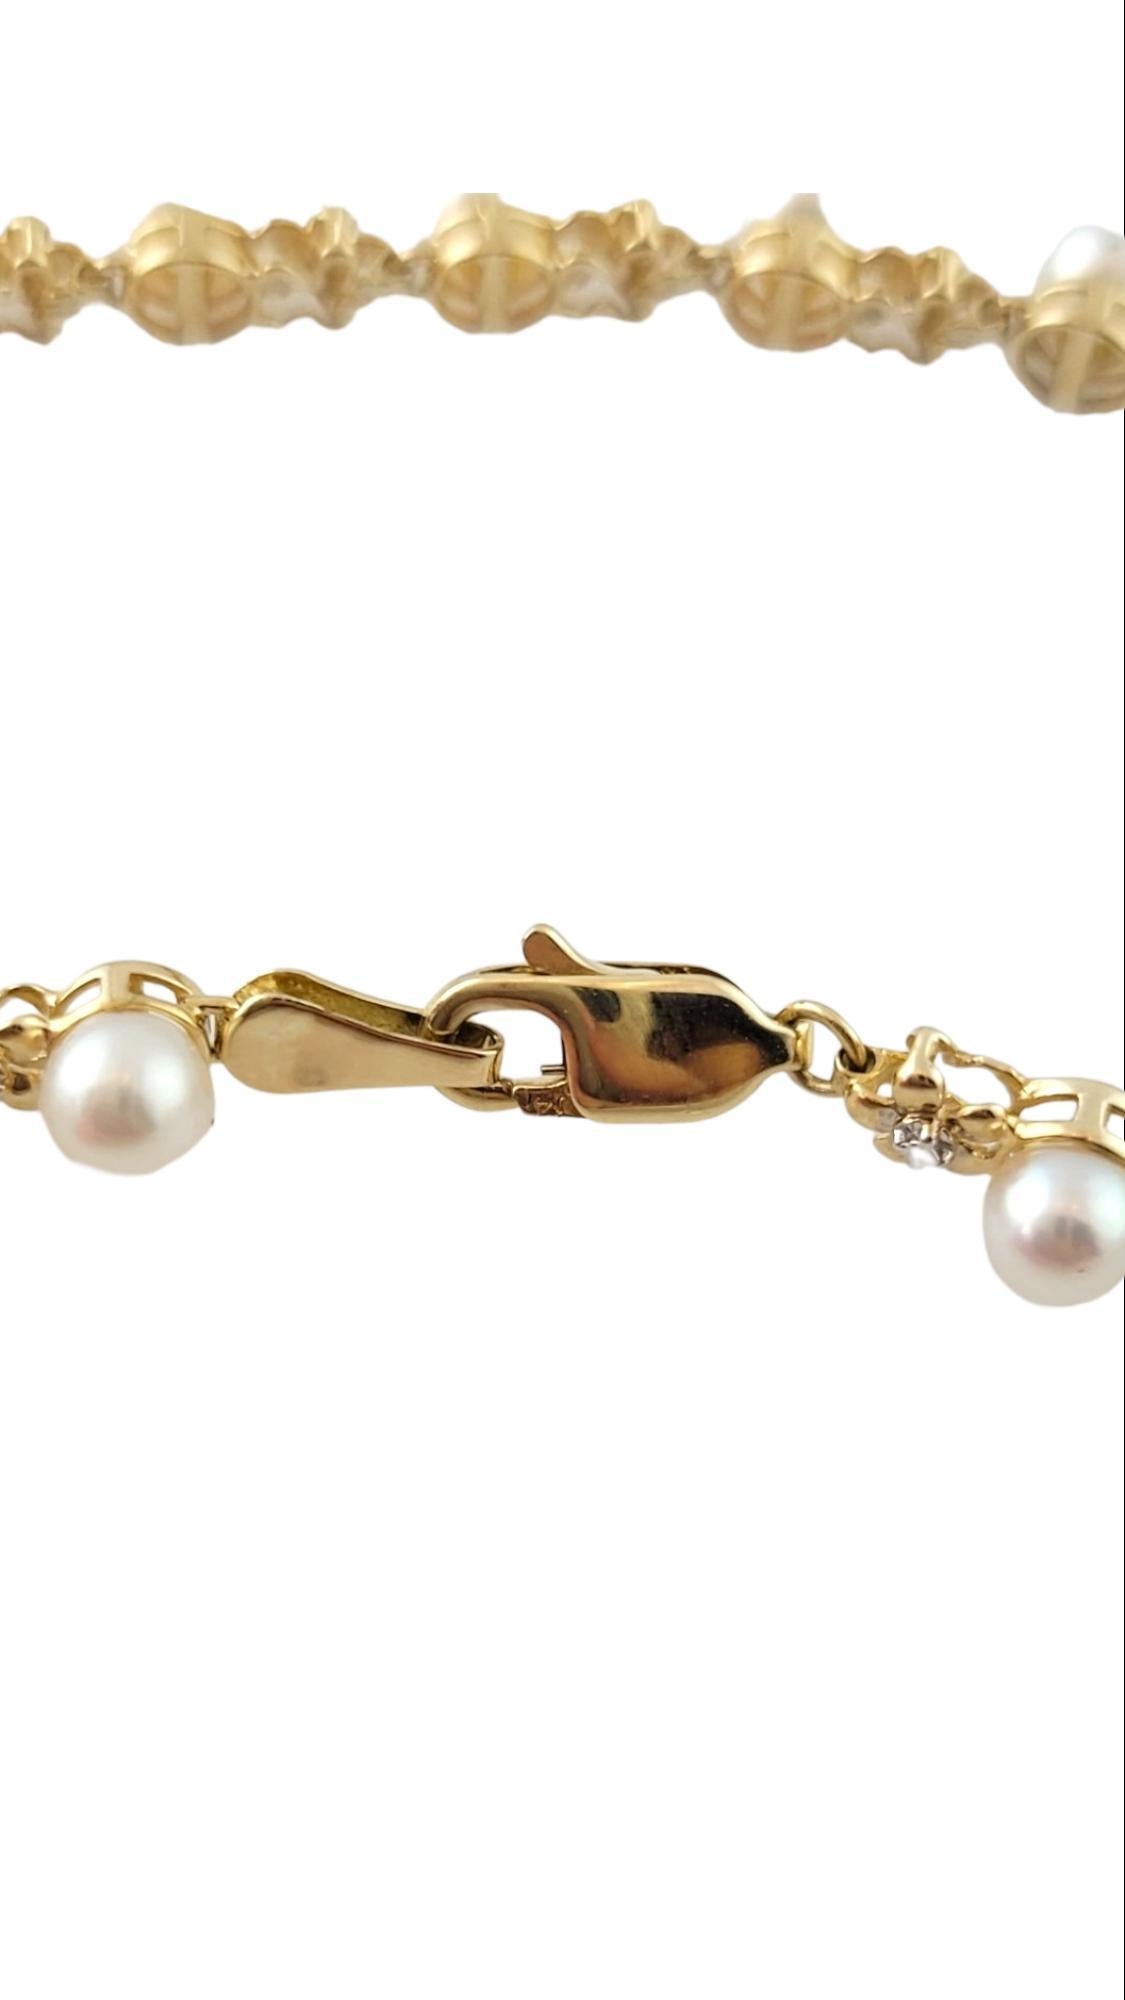 14K Yellow Gold Pearl Tennis Bracelet #15200 In Good Condition For Sale In Washington Depot, CT